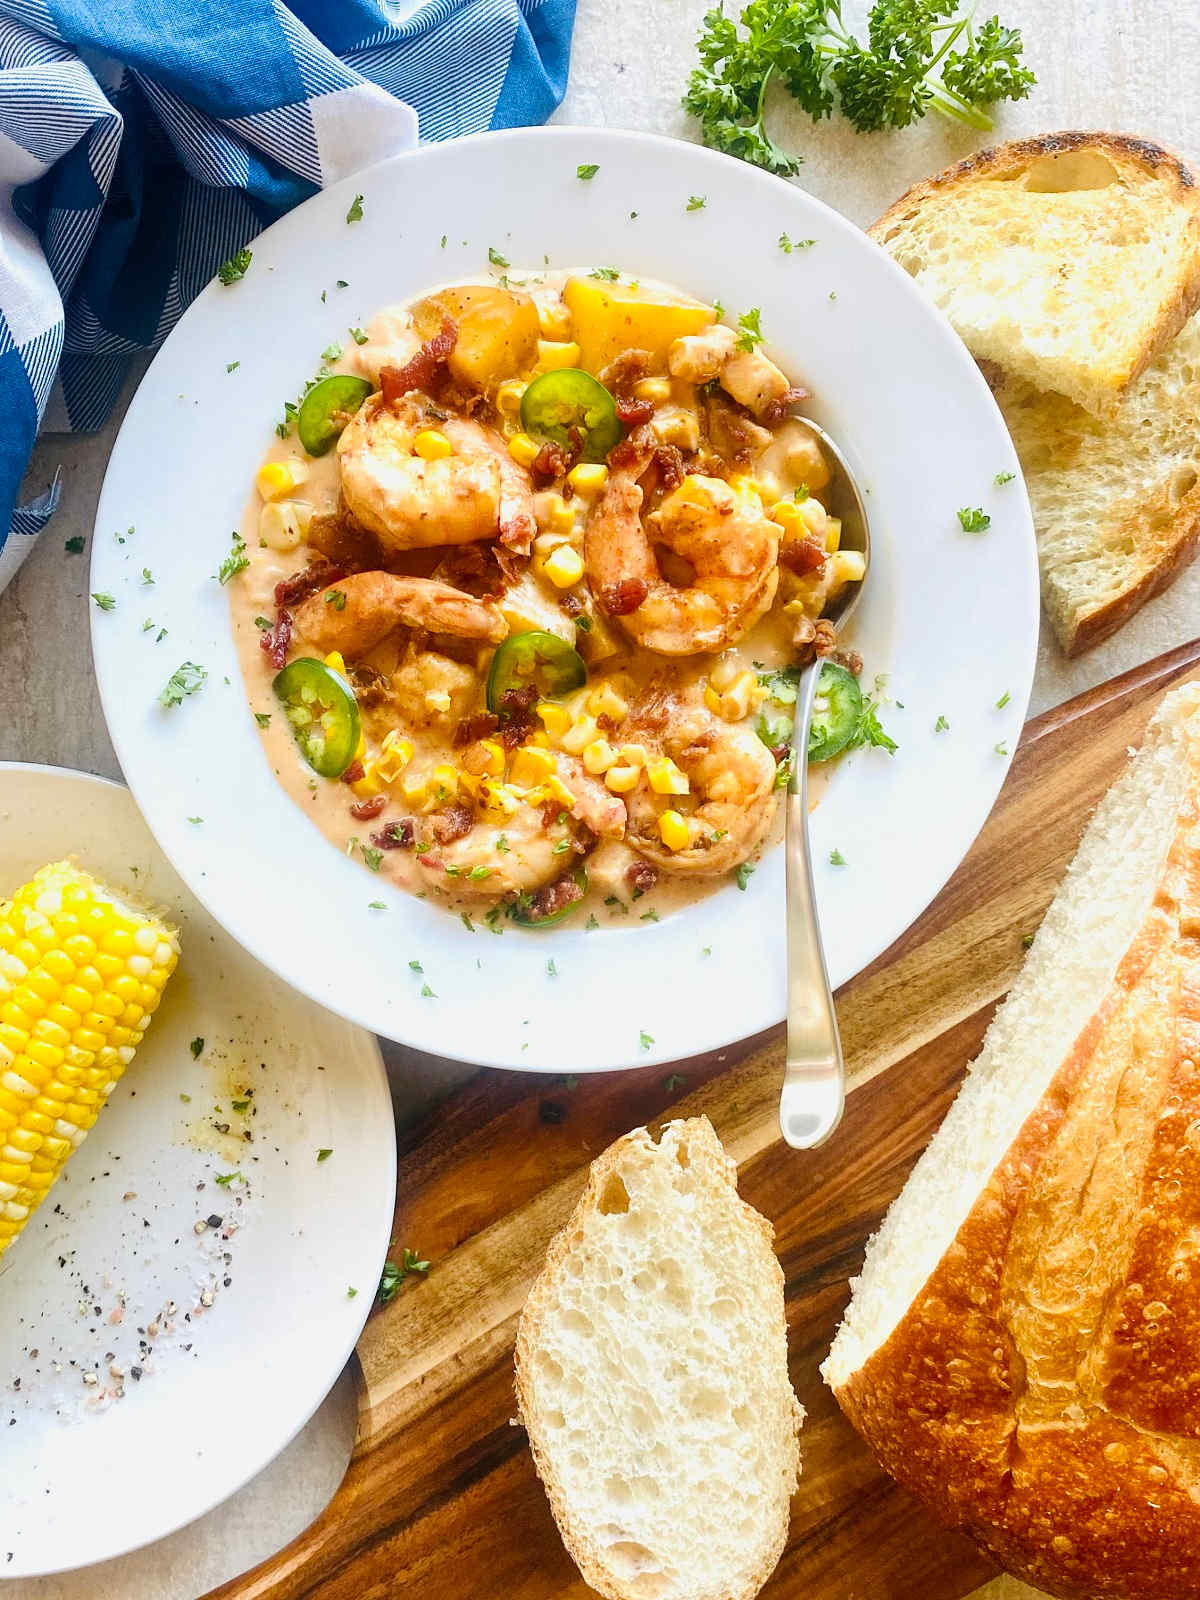 shrimp and corn bisque in a dish next to corn and bread.